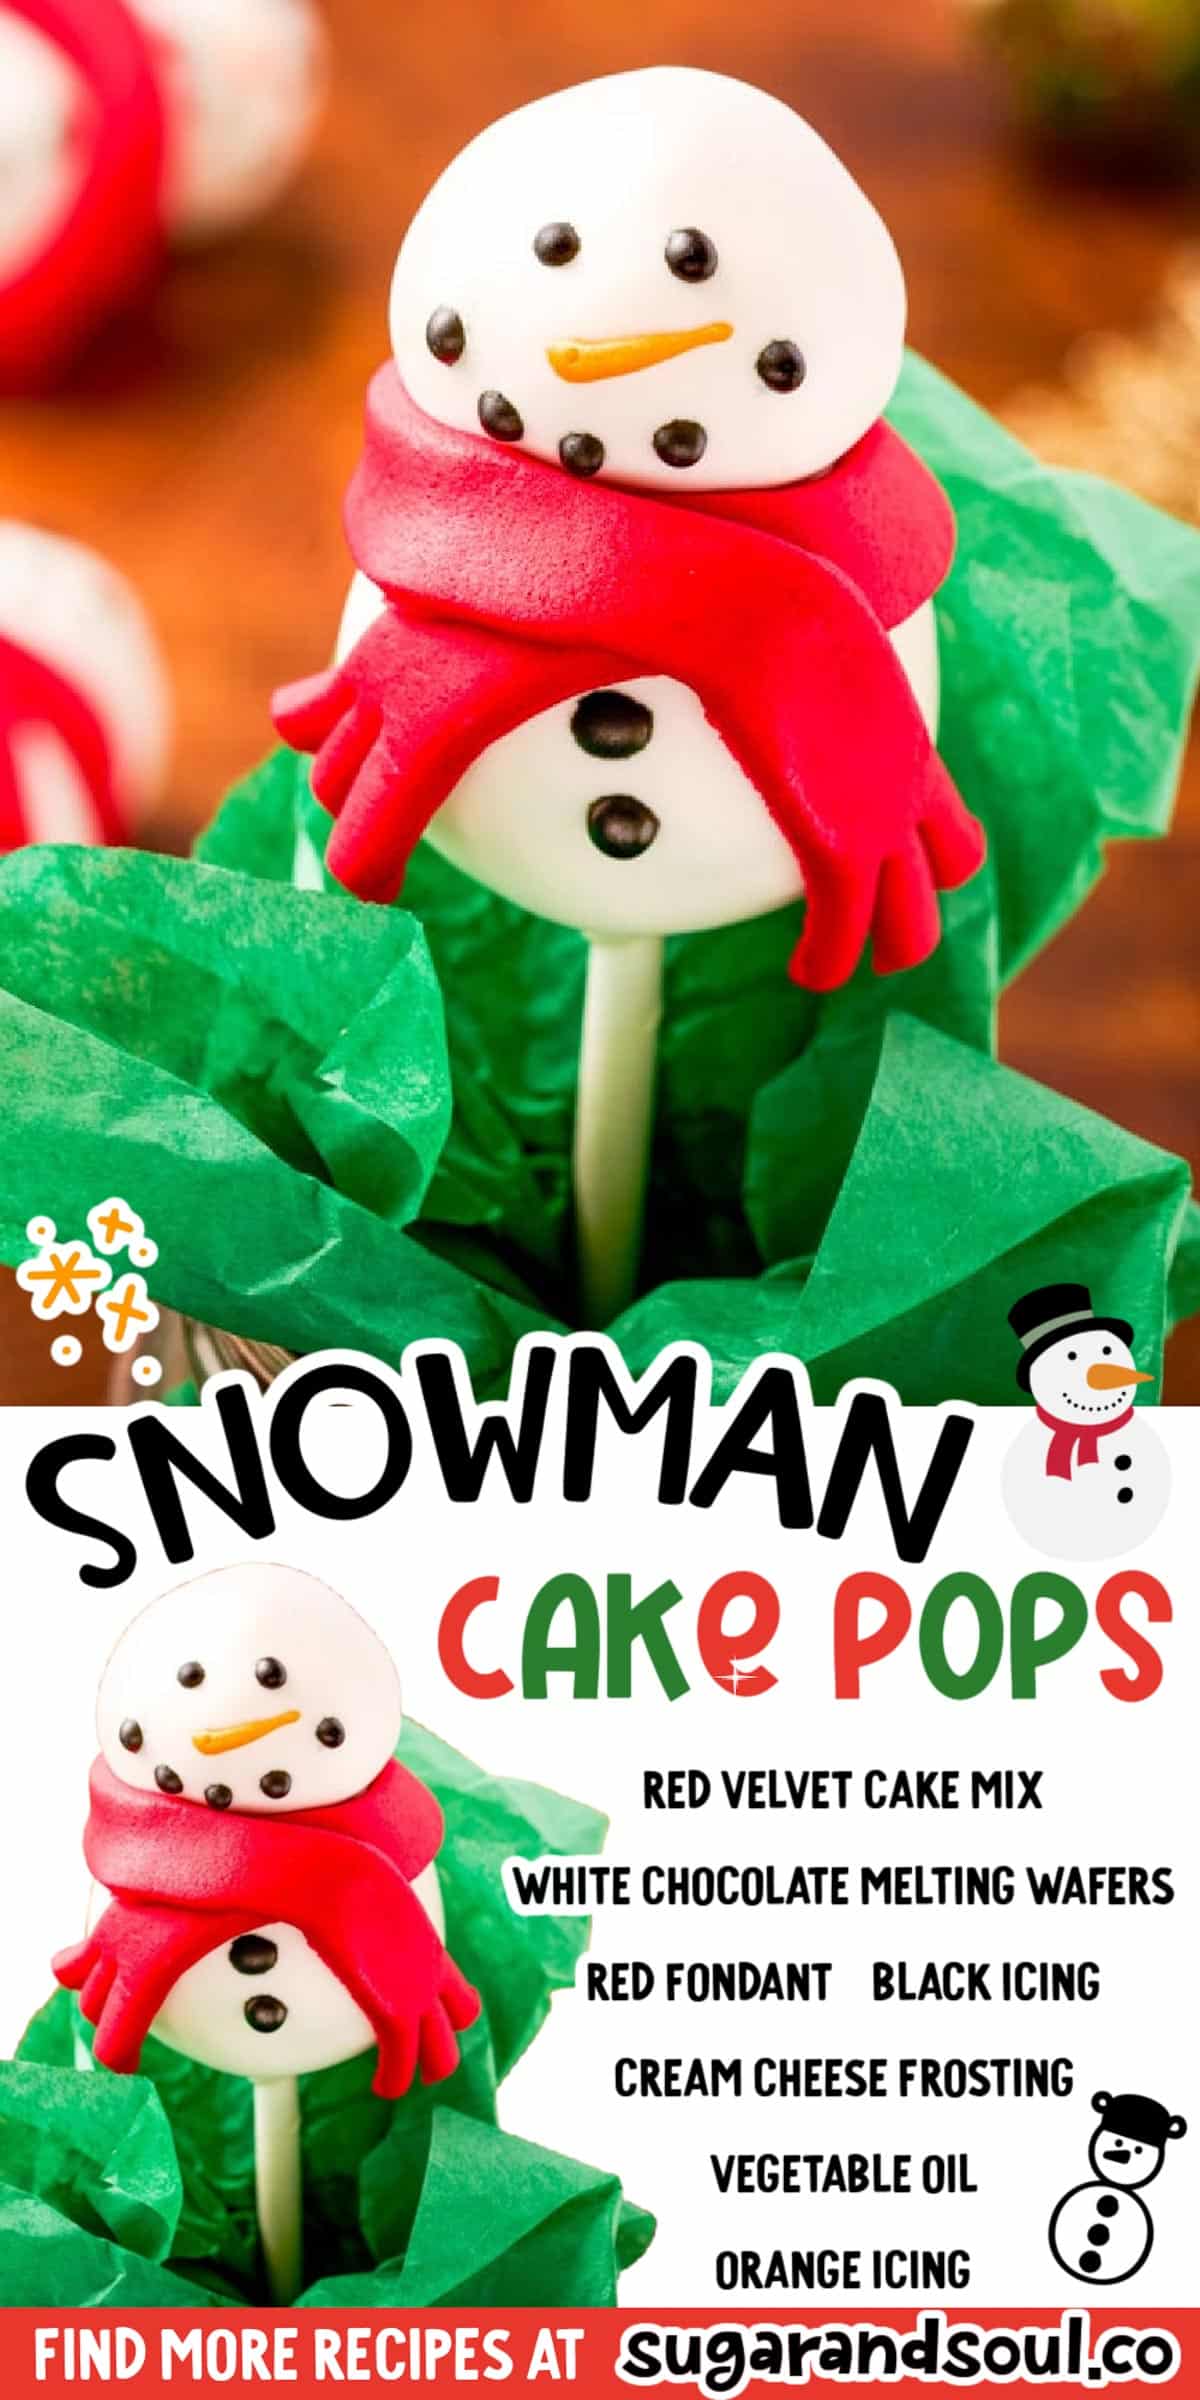 These Snowman Cake Pops are such a fun, sweet winter treat that's easy to make using a boxed cake mix, melted chocolate, icing, and fondant! via @sugarandsoulco